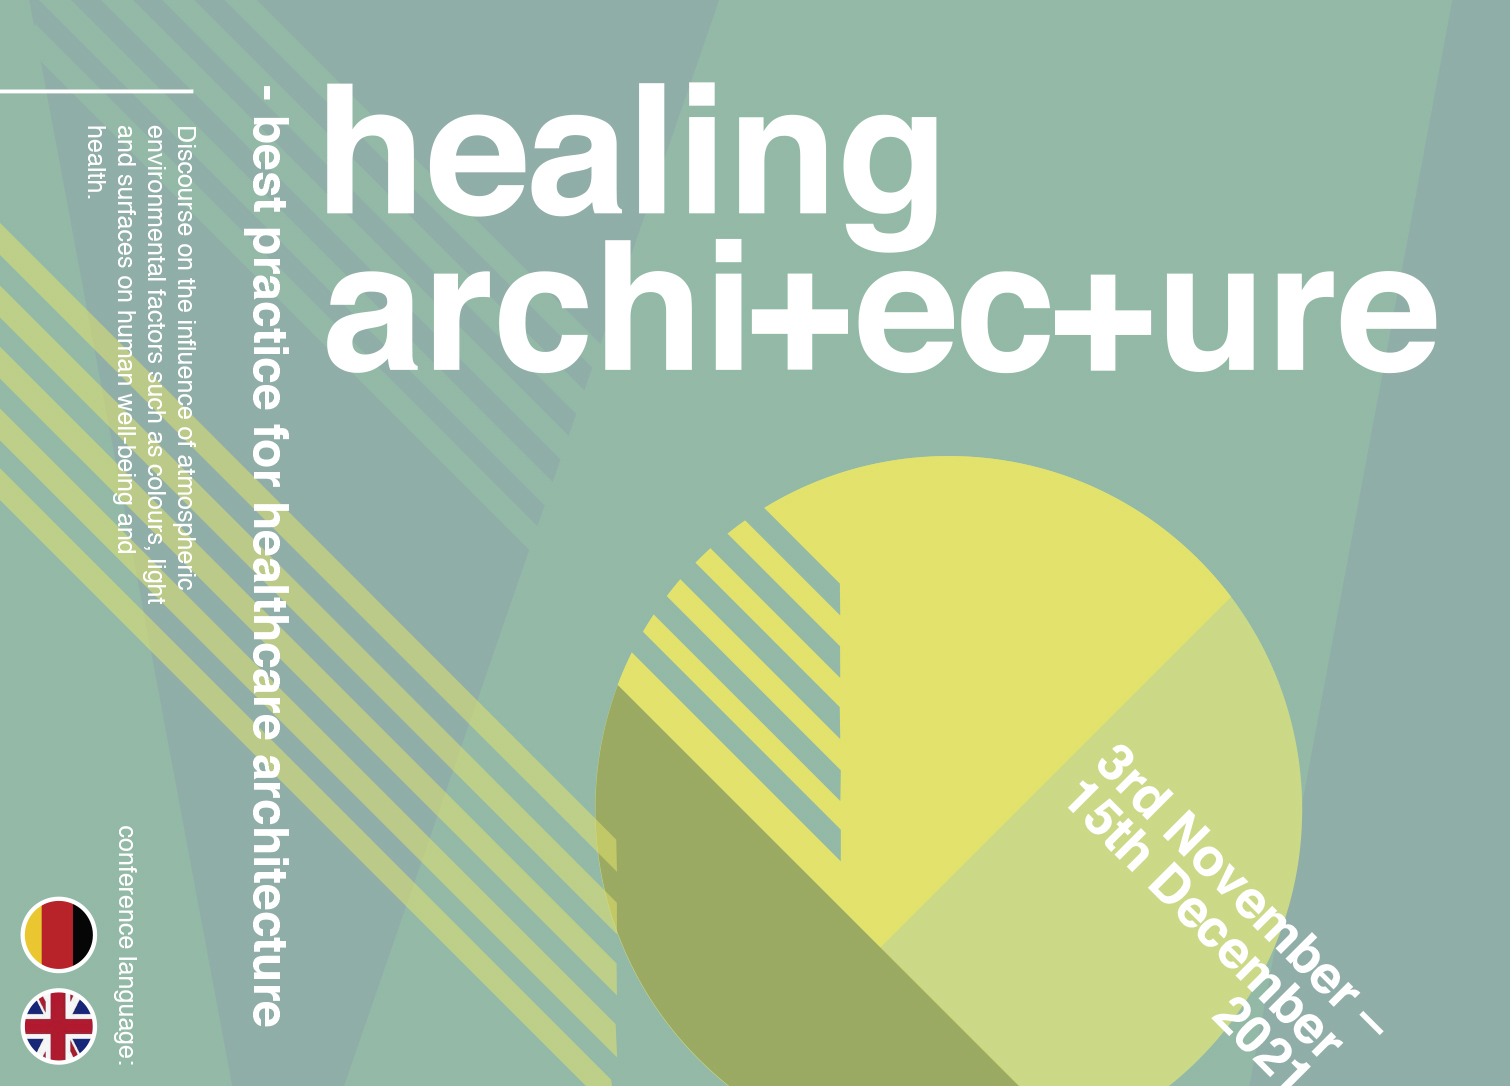 healing architecture thesis